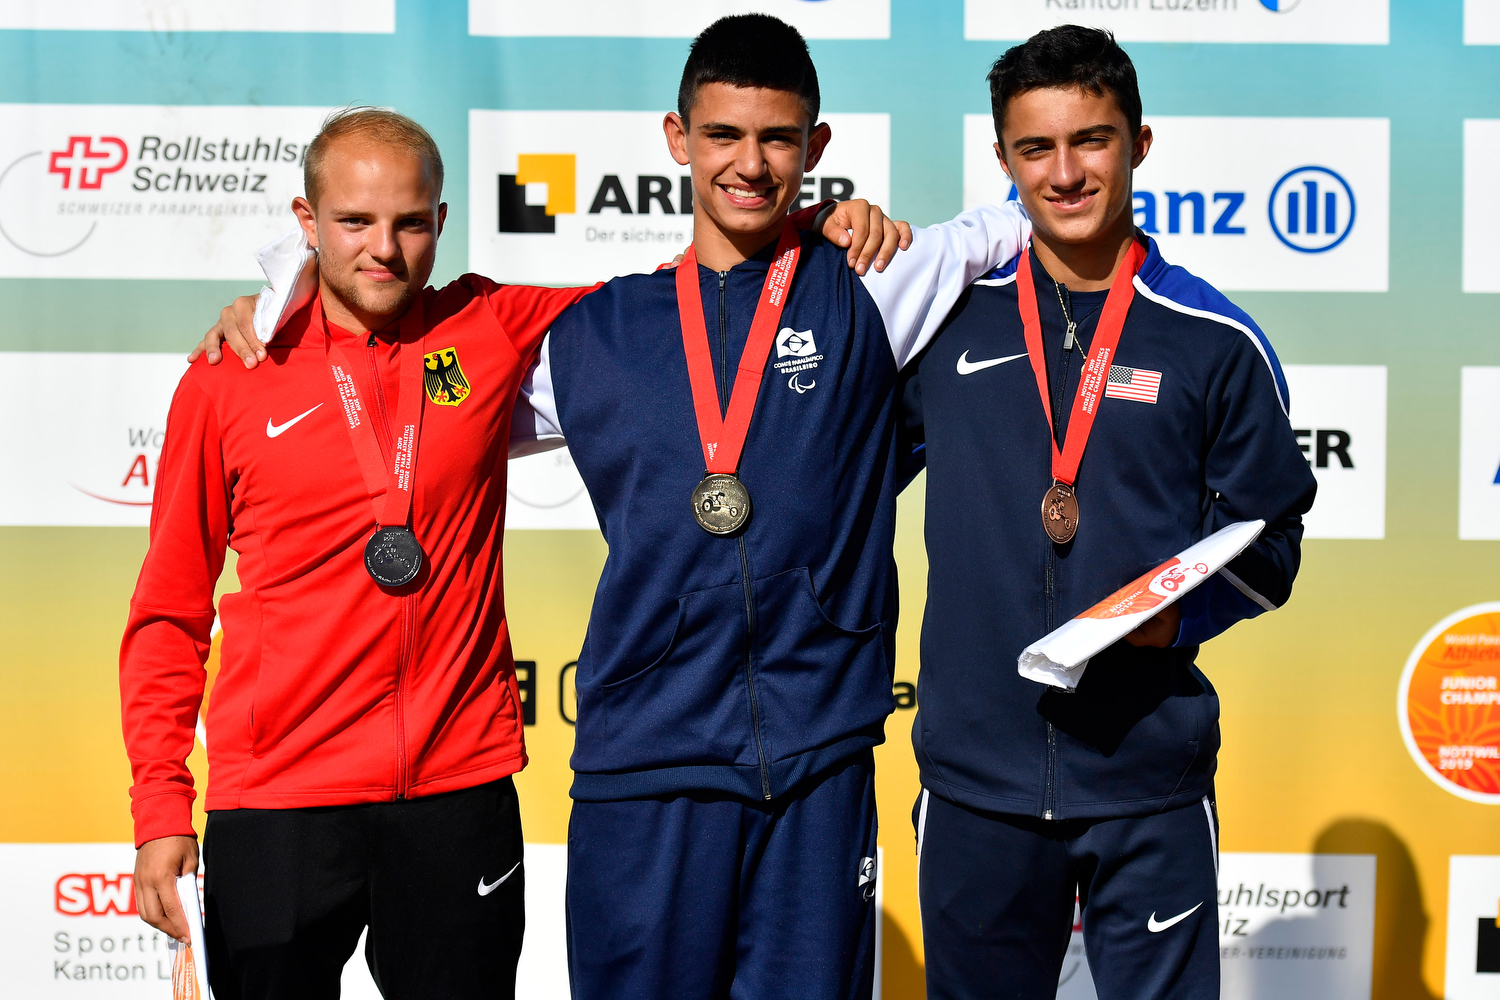 Three young men on a podium with their medals